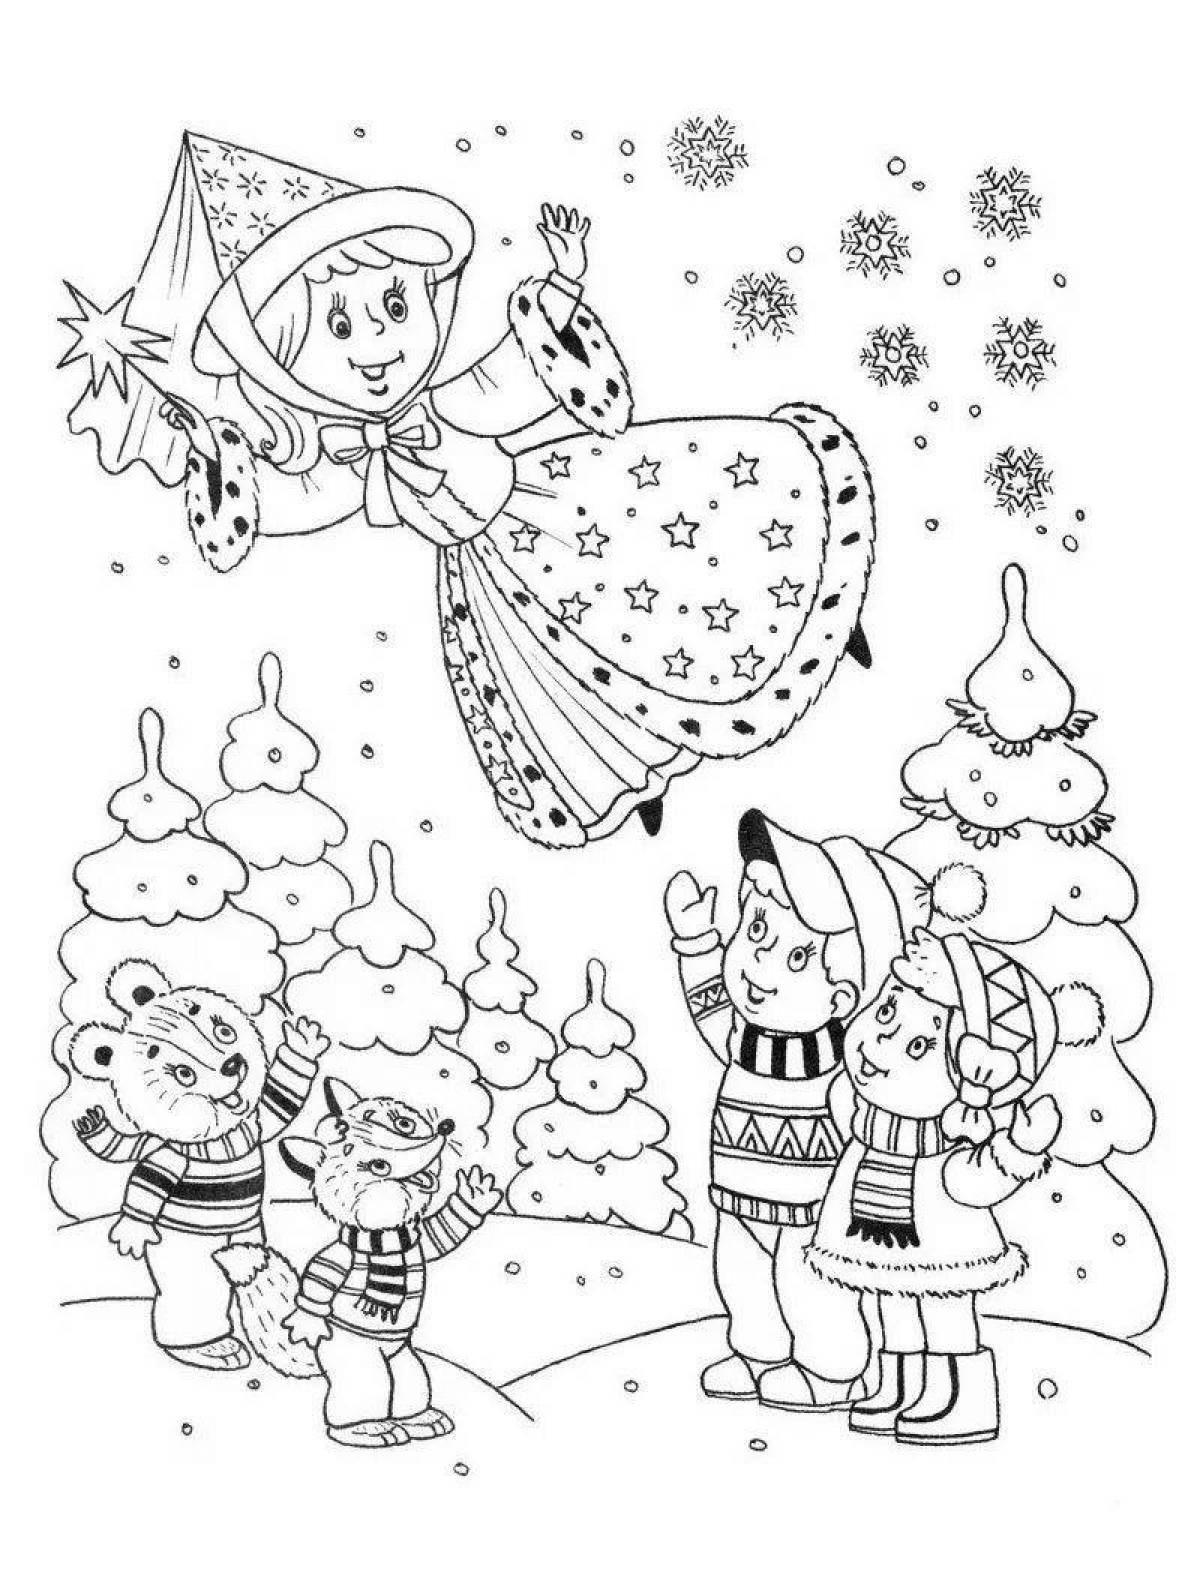 Amazing winter coloring book for kids 6-7 years old